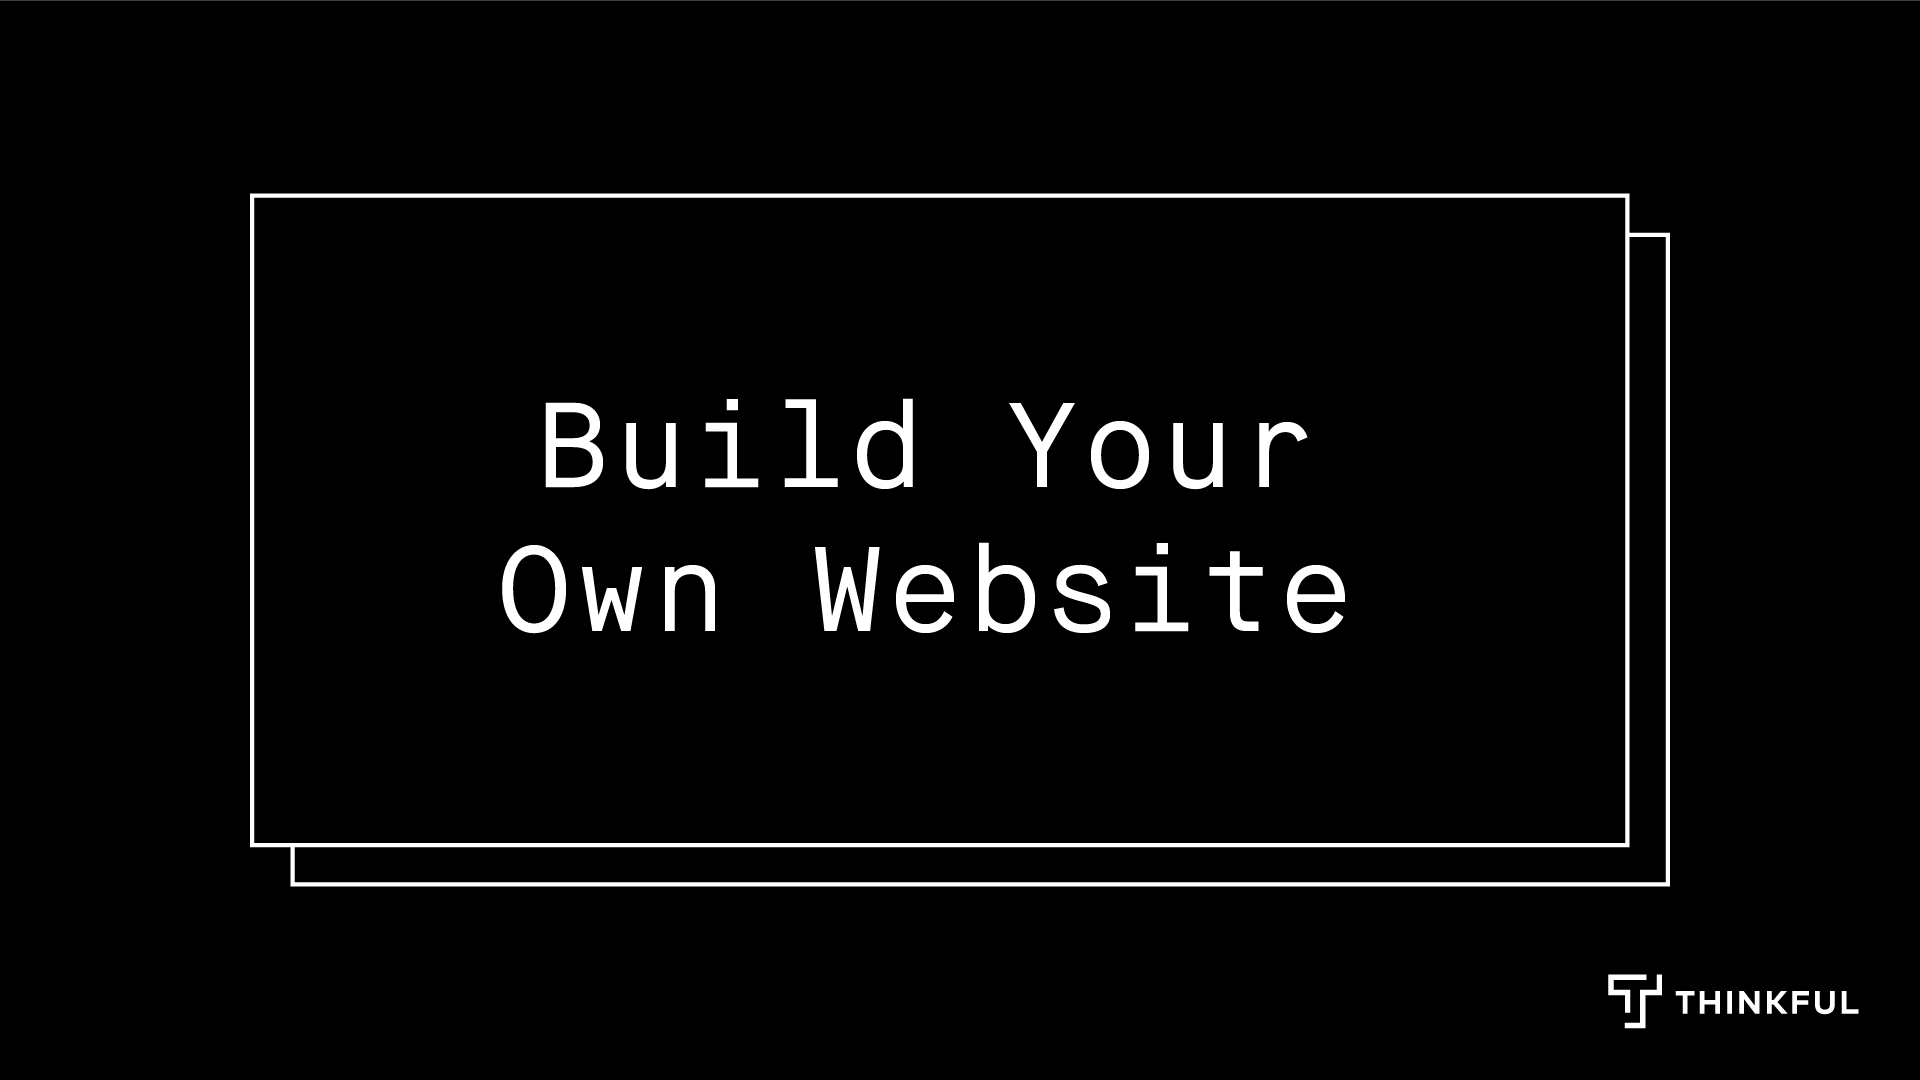 Thinkful Webinar: Build Your Own Website with HTML/CSS